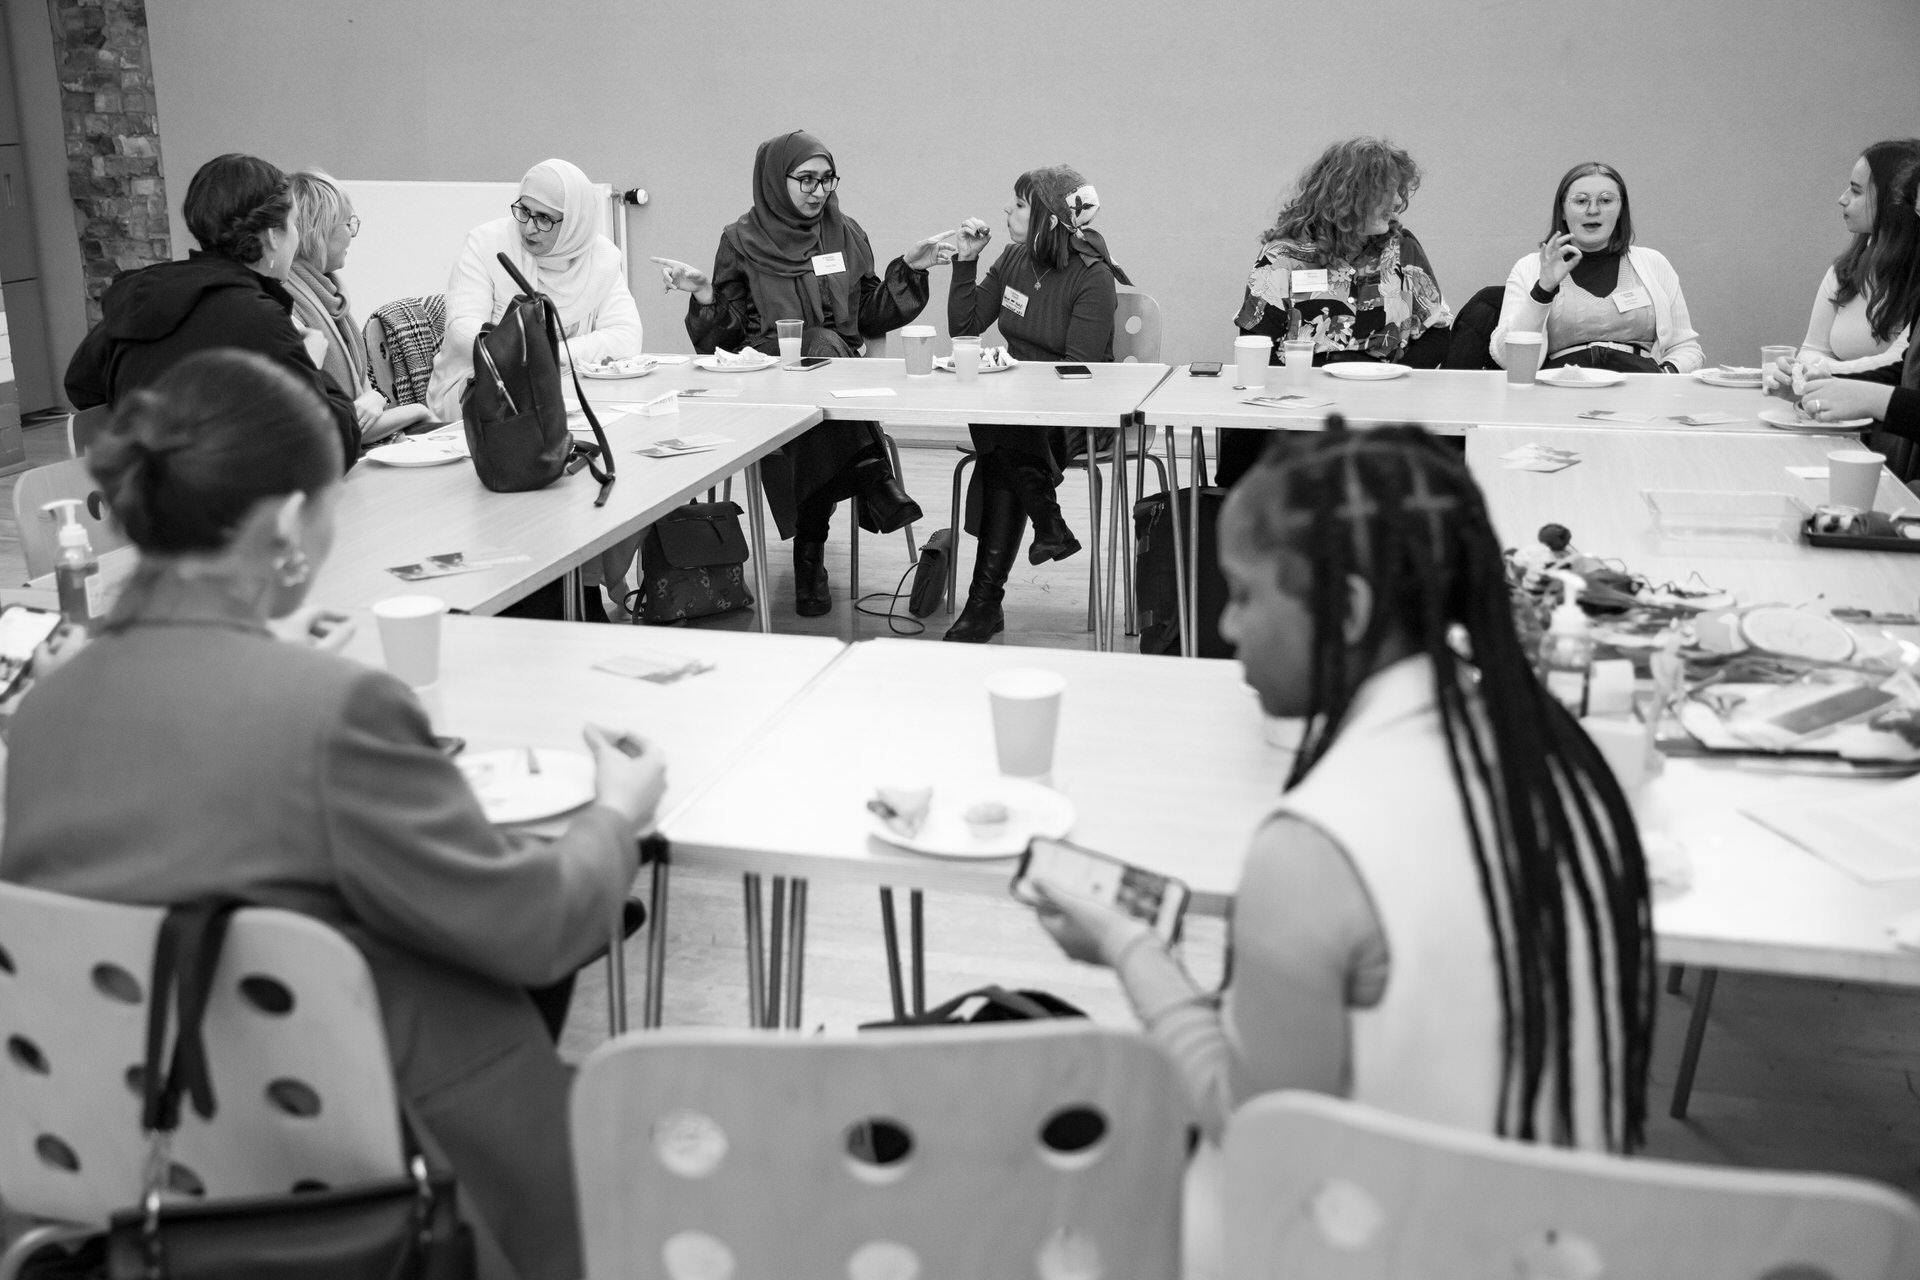 A group of young people engaged in conversations around a table.